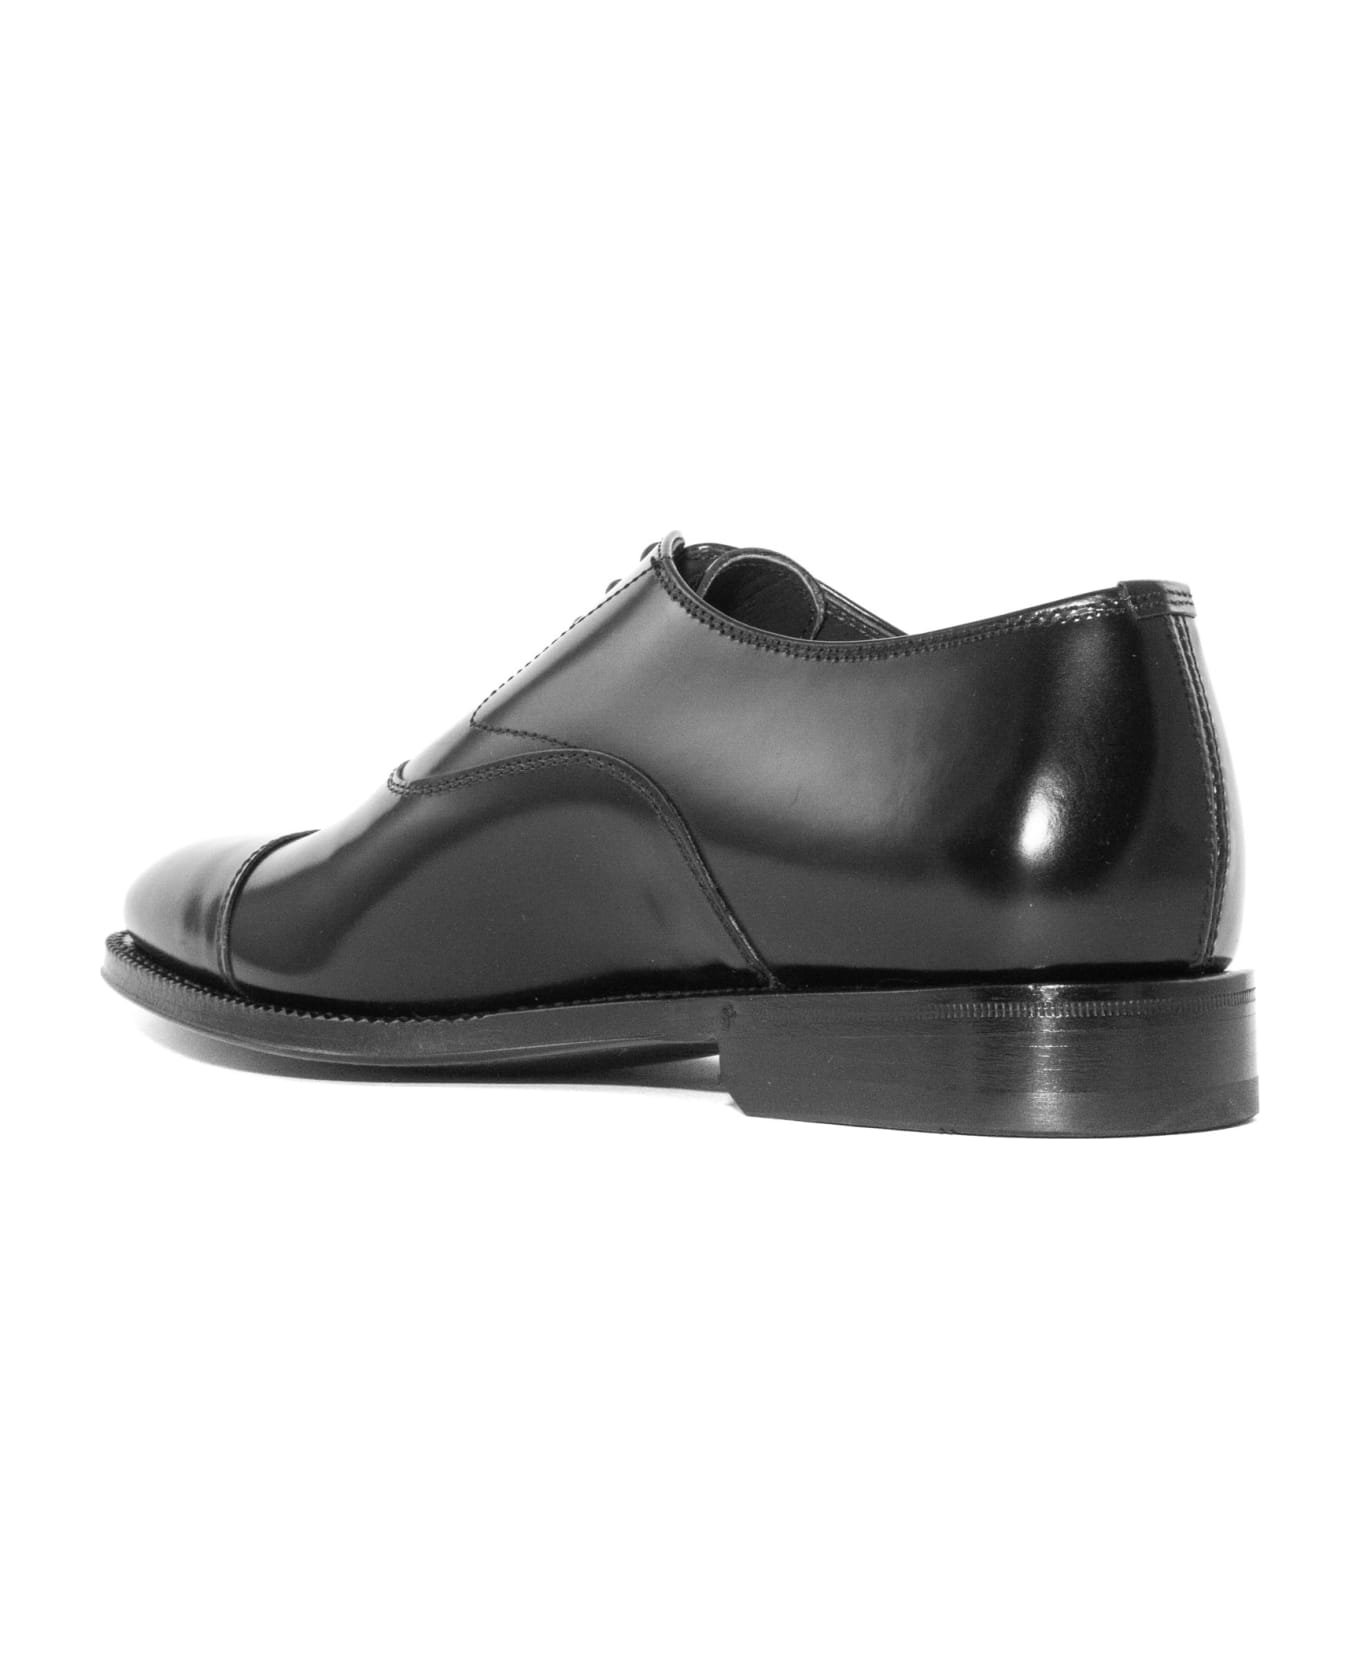 Green George Black Brushed Leather Oxford Shoes - Black ローファー＆デッキシューズ